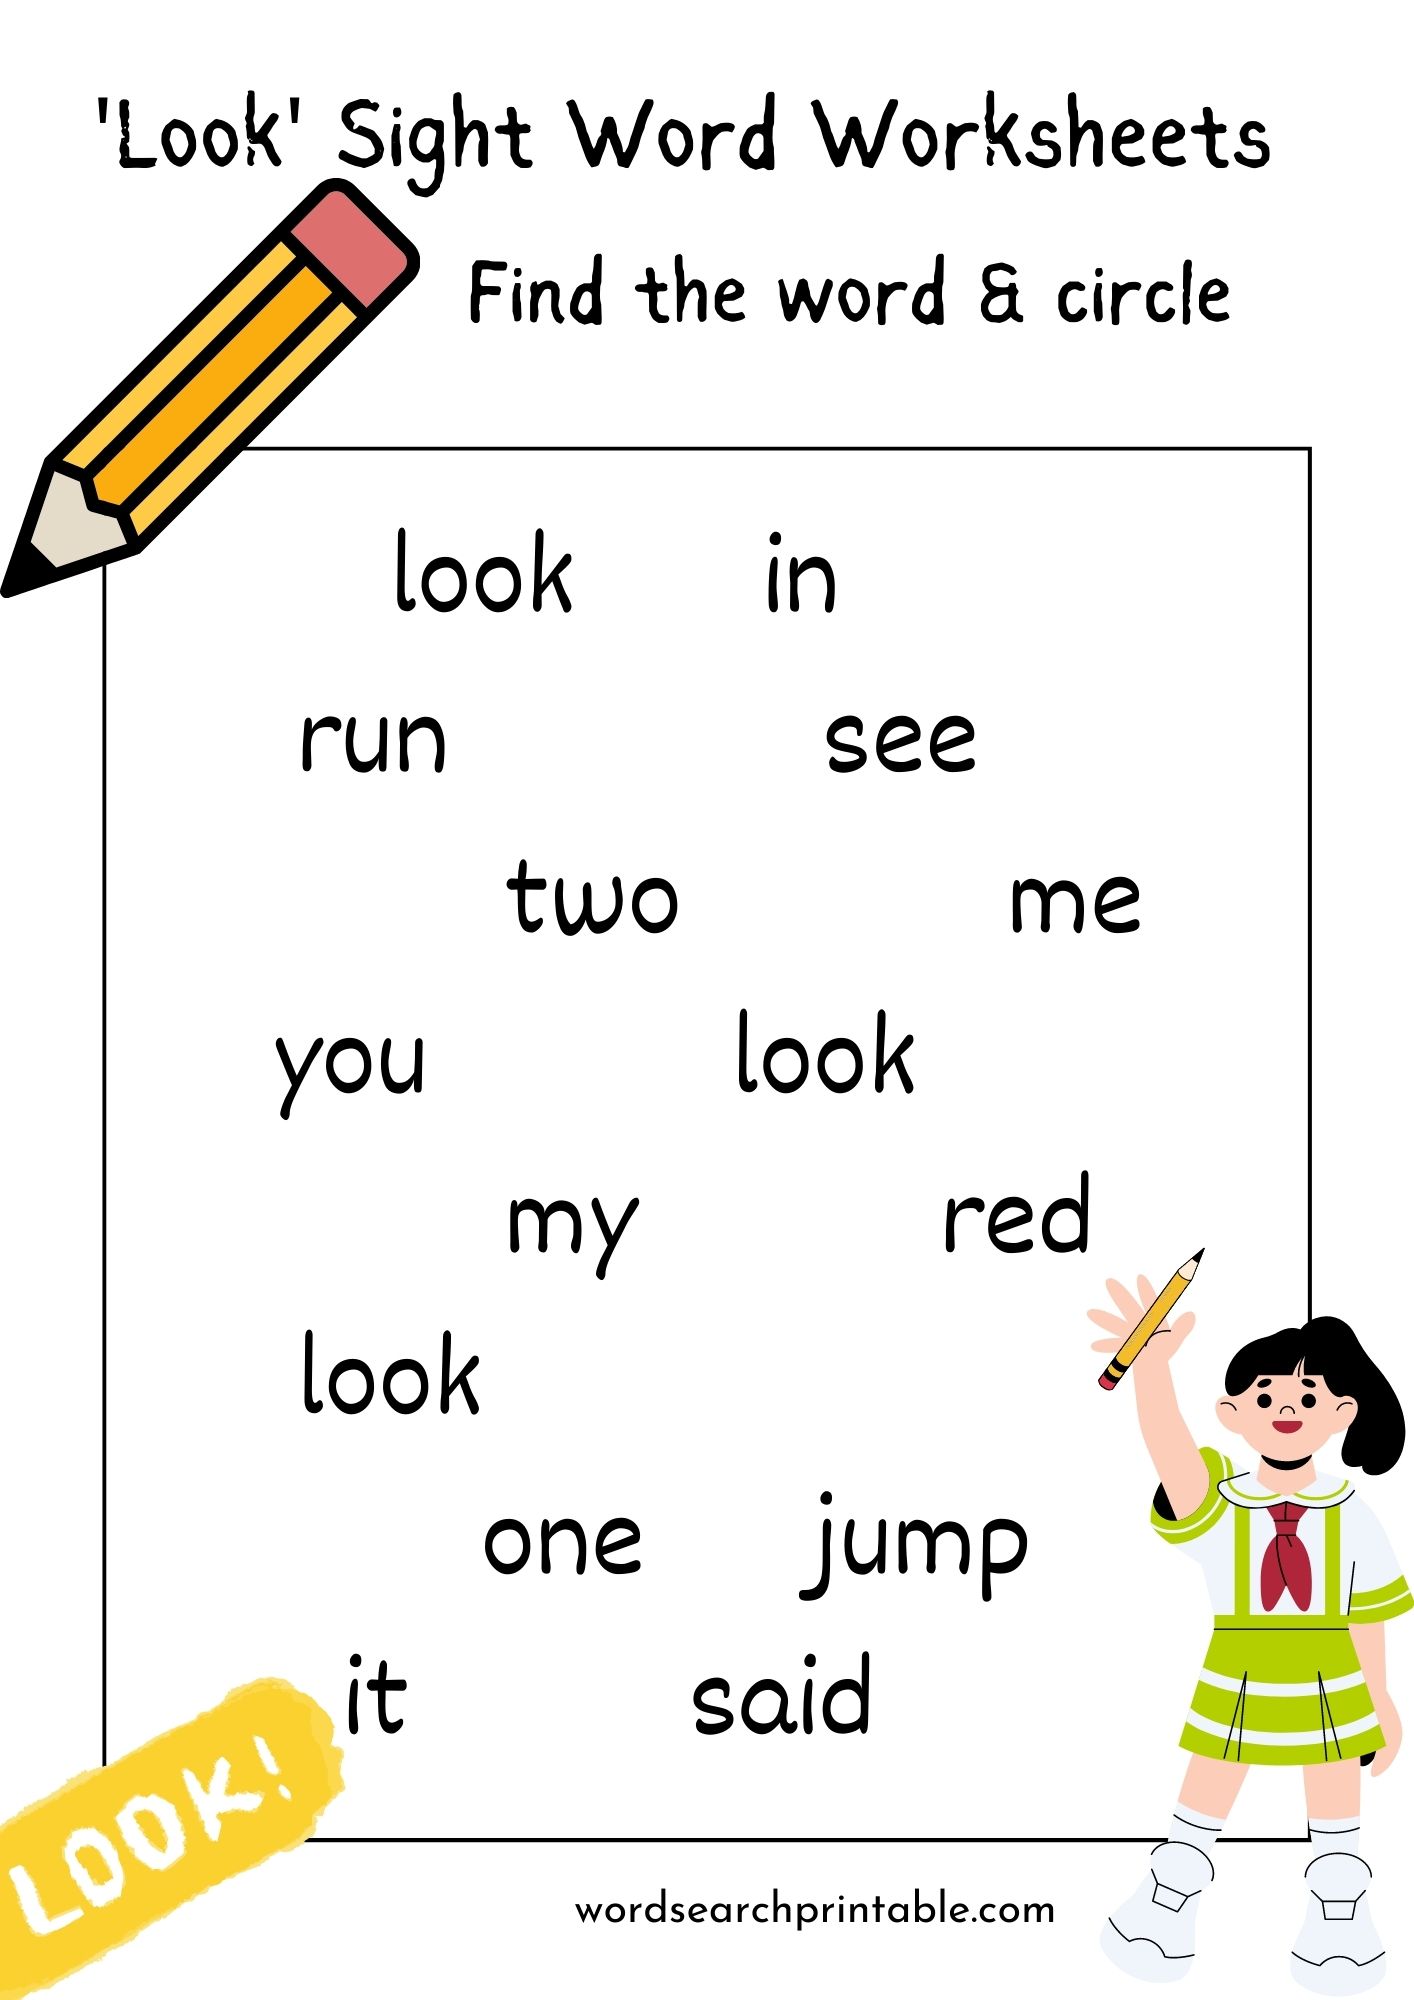 Find the sight word Look and circle it